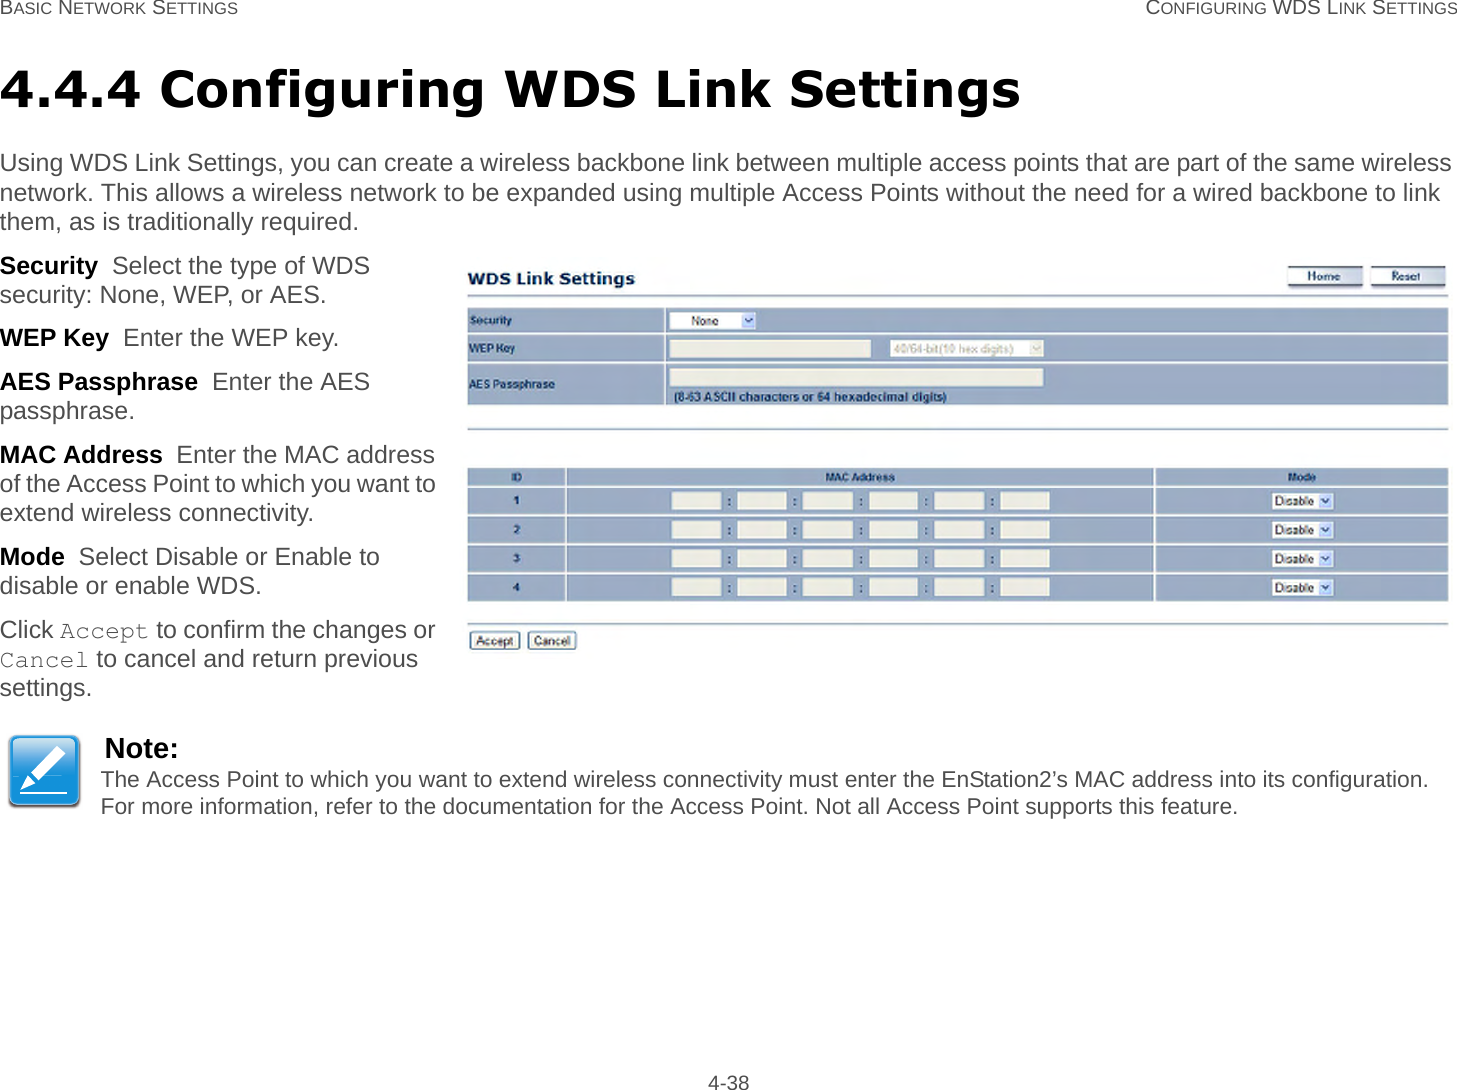 BASIC NETWORK SETTINGS CONFIGURING WDS LINK SETTINGS 4-384.4.4 Configuring WDS Link SettingsUsing WDS Link Settings, you can create a wireless backbone link between multiple access points that are part of the same wireless network. This allows a wireless network to be expanded using multiple Access Points without the need for a wired backbone to link them, as is traditionally required.Security  Select the type of WDS security: None, WEP, or AES.WEP Key  Enter the WEP key.AES Passphrase  Enter the AES passphrase.MAC Address  Enter the MAC address of the Access Point to which you want to extend wireless connectivity.Mode  Select Disable or Enable to disable or enable WDS.Click Accept to confirm the changes or Cancel to cancel and return previous settings.Note:The Access Point to which you want to extend wireless connectivity must enter the EnStation2’s MAC address into its configuration. For more information, refer to the documentation for the Access Point. Not all Access Point supports this feature.